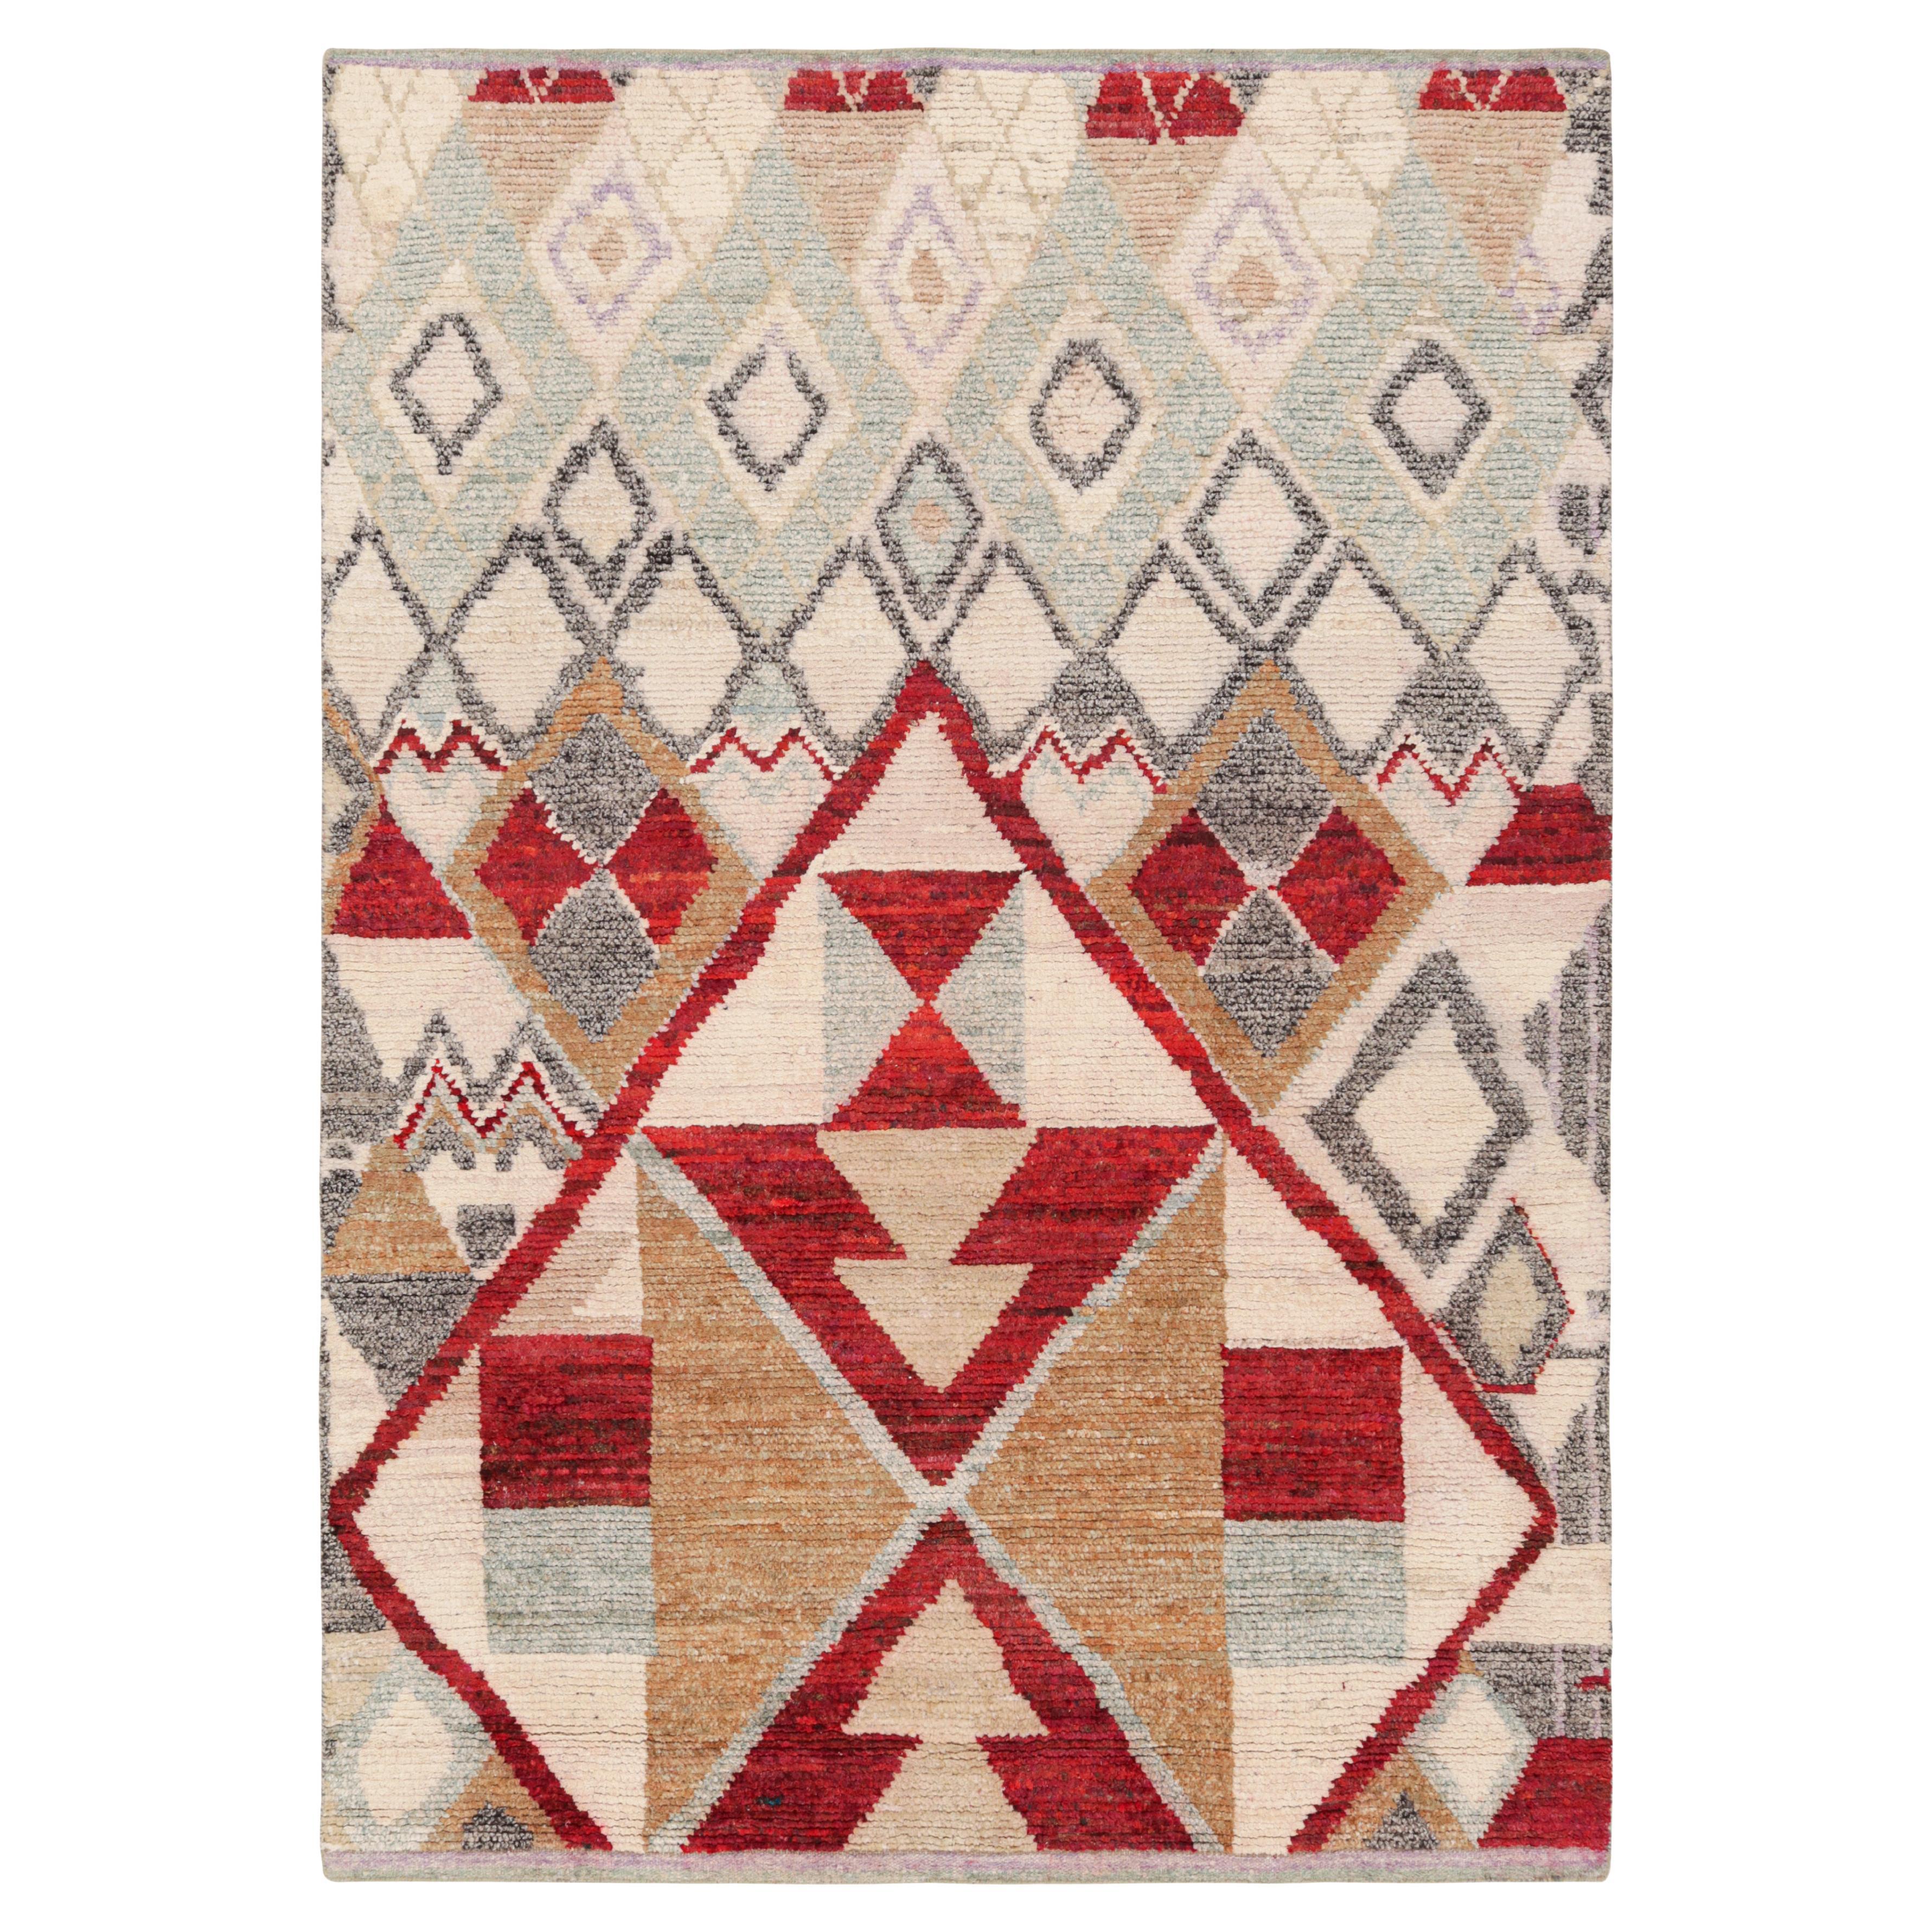 Rug & Kilim’s Contemporary Moroccan Style Rug Polychromatic Geometric Patterns For Sale